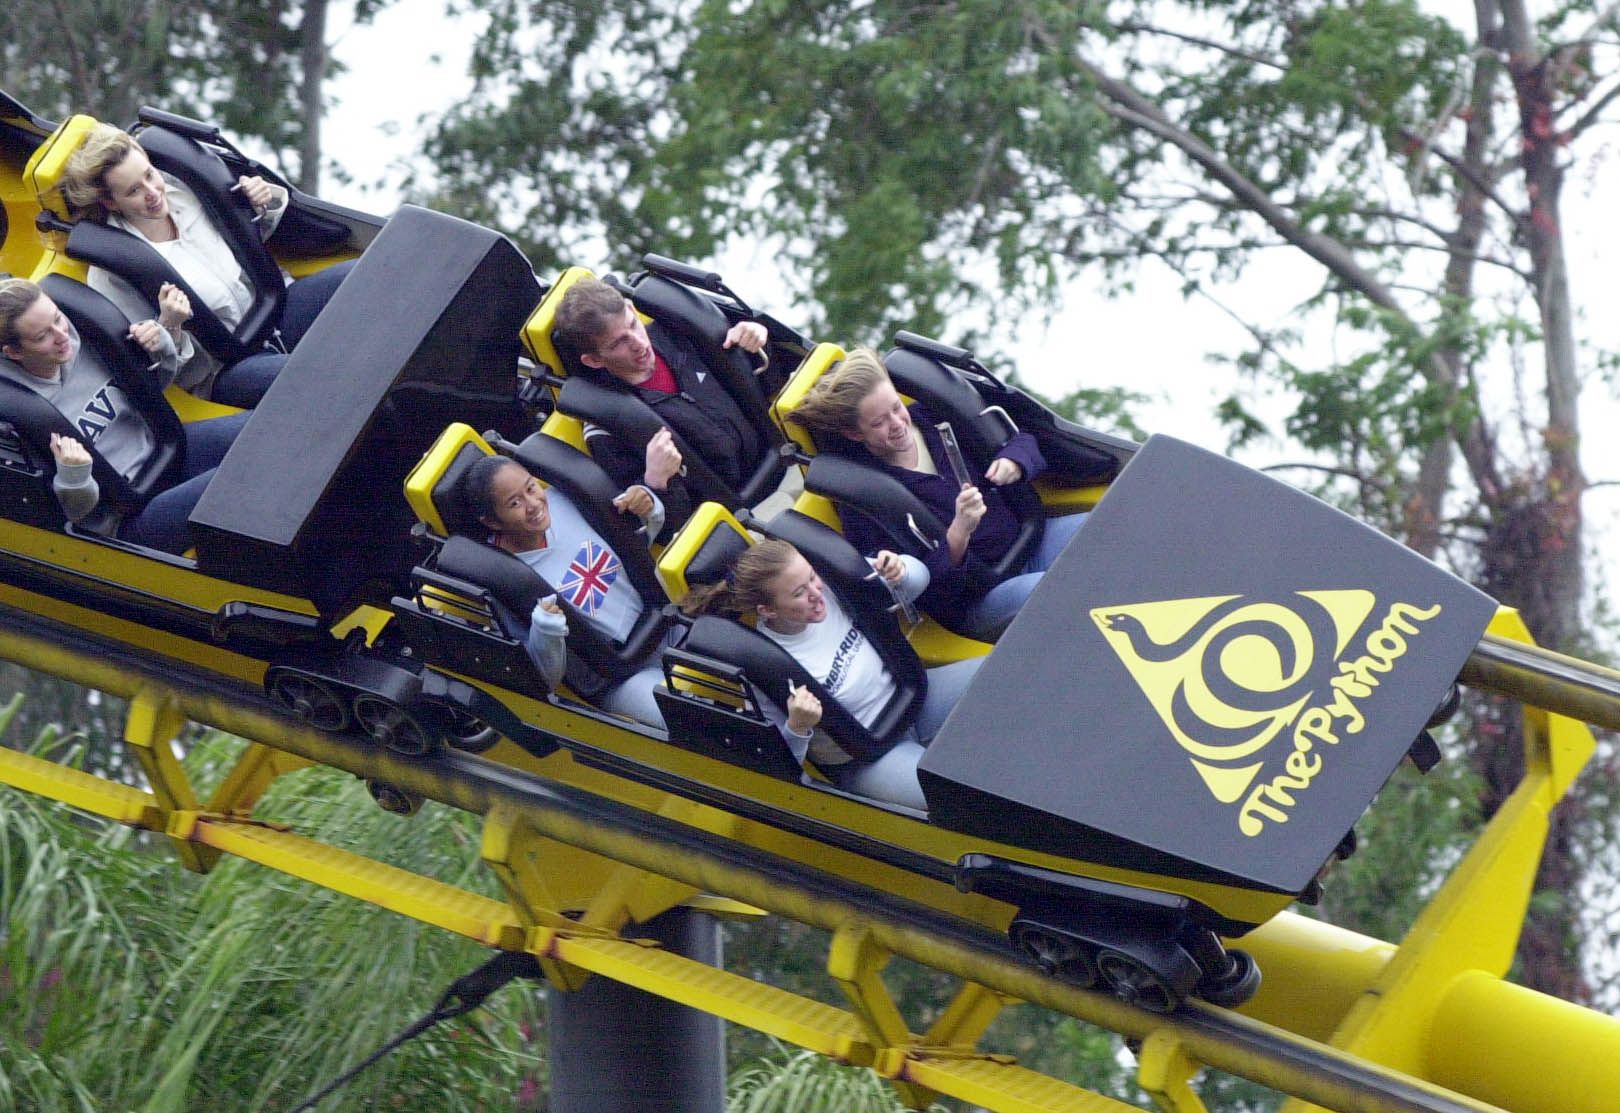 The Scorpion Rollercoaster at Busch Gardens Tampa Florida USA with